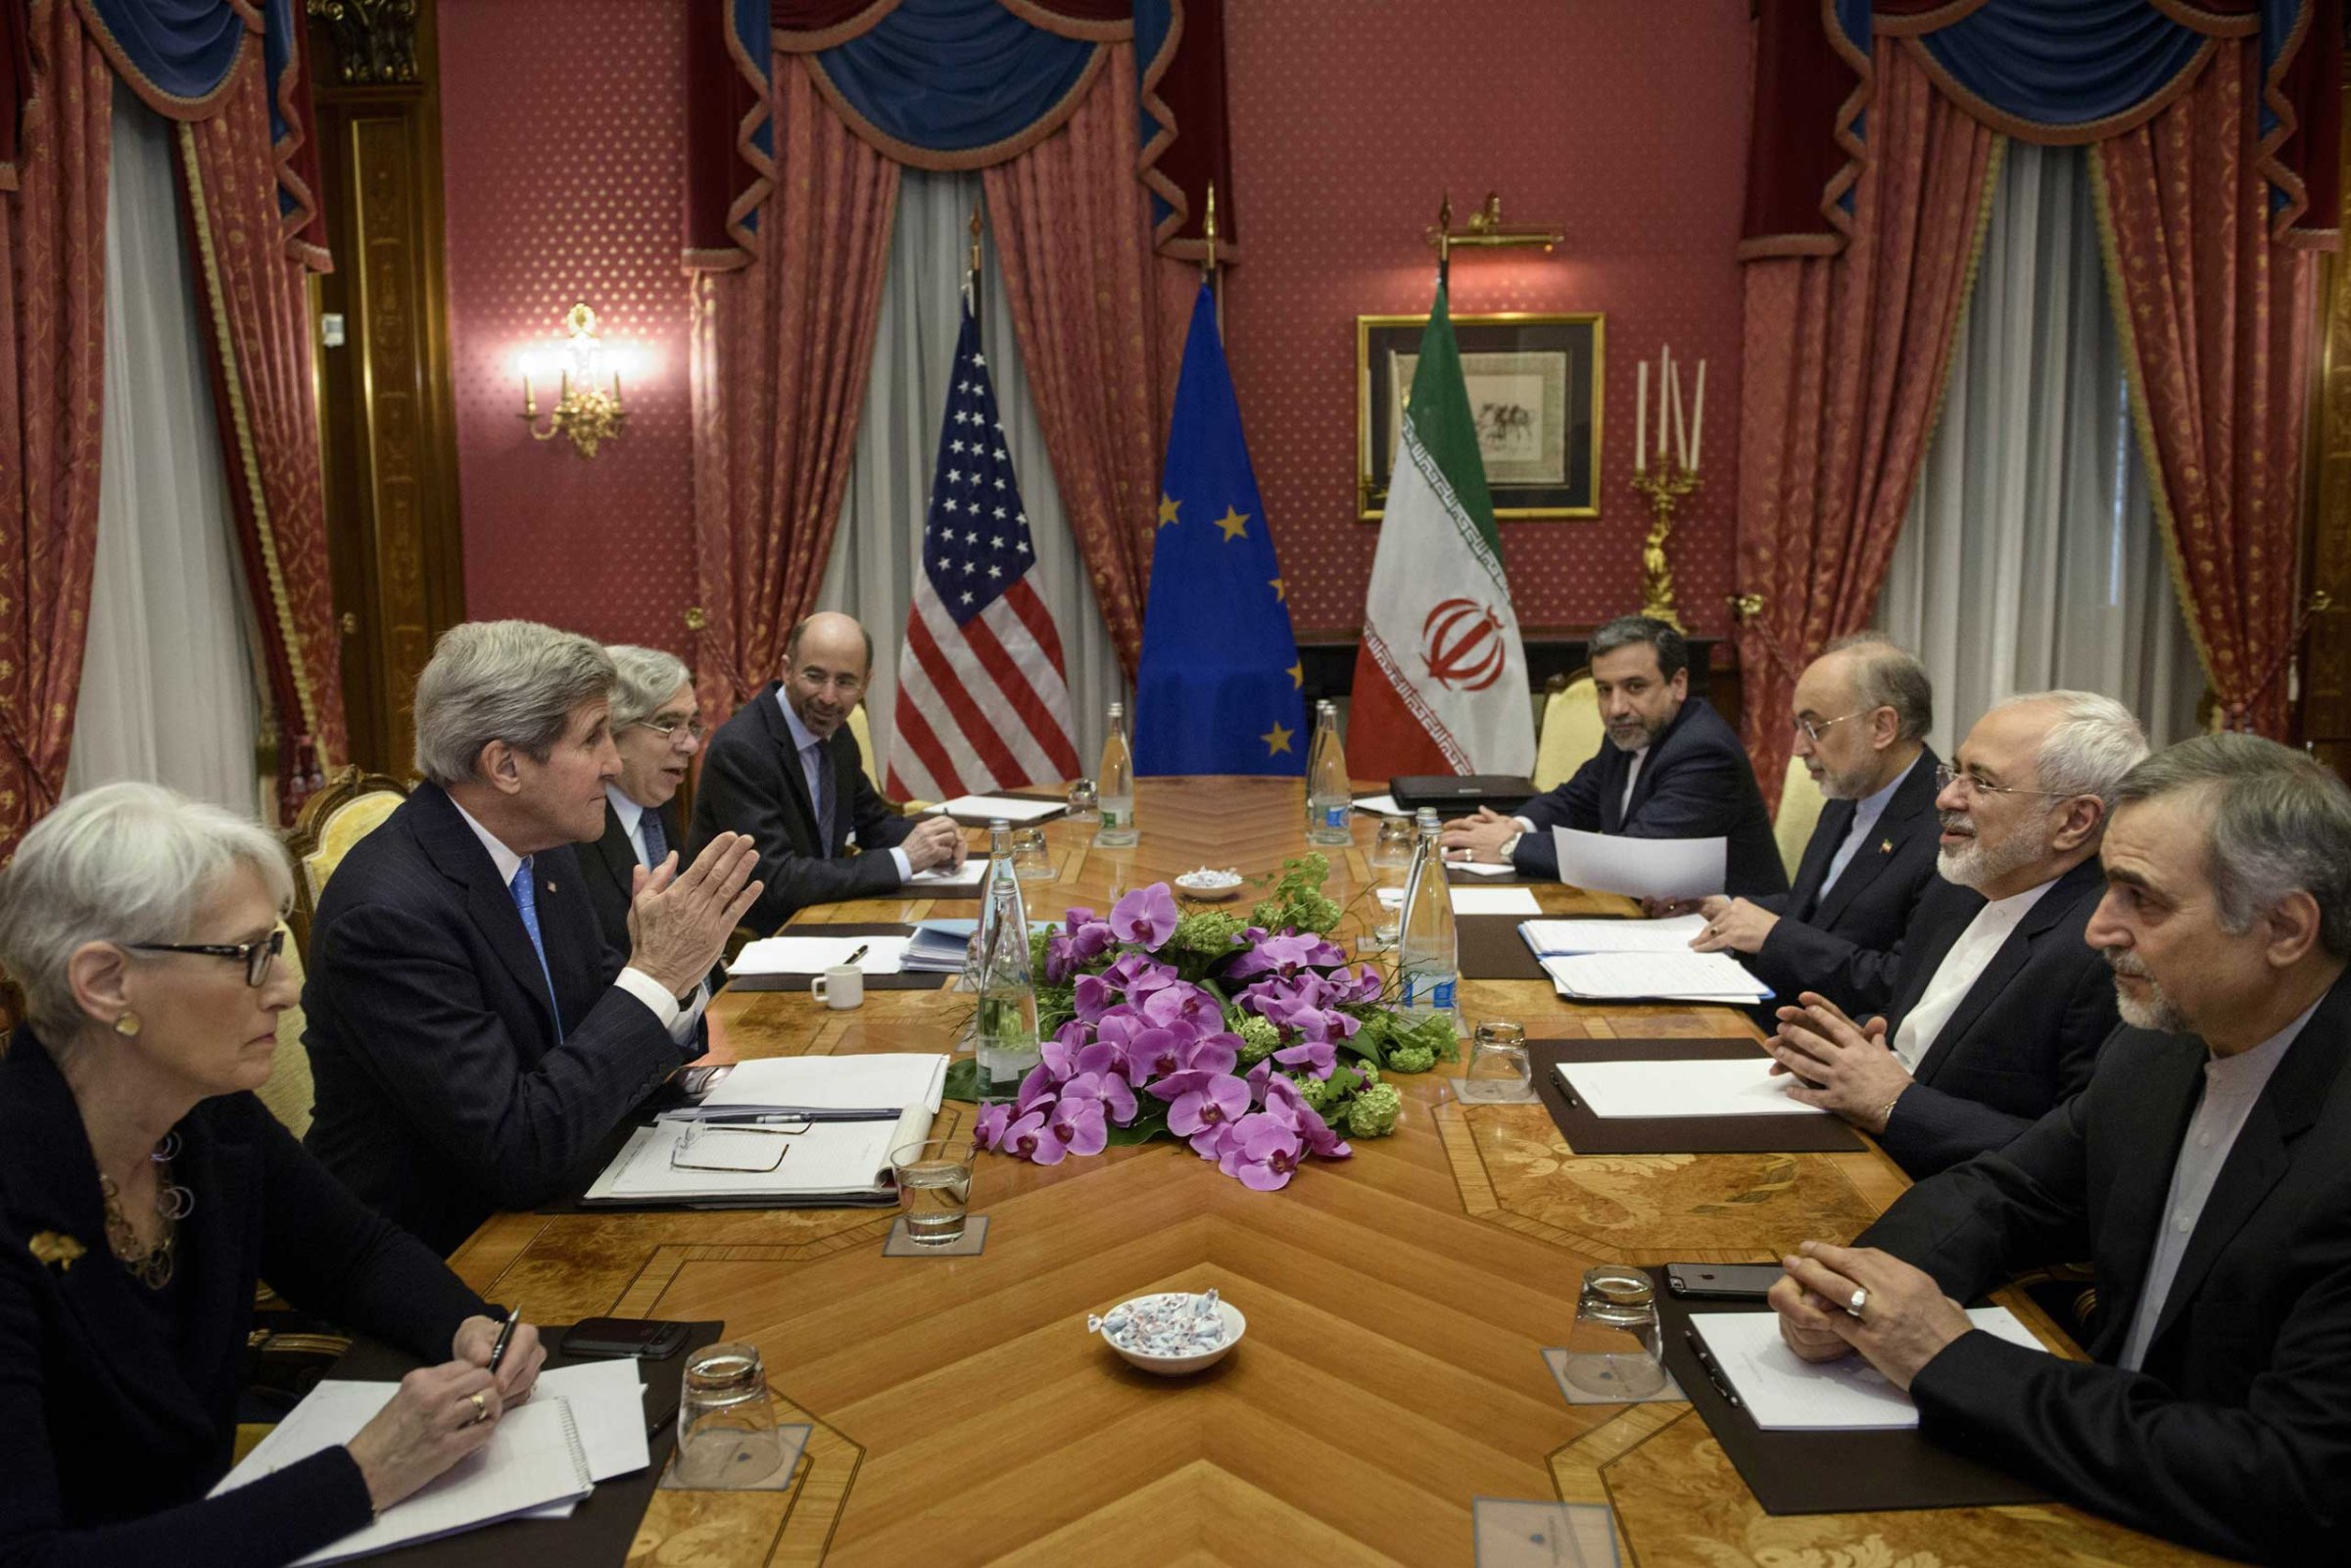 From left, U.S. Under Secretary for Political Affairs Wendy Sherman, U.S. Secretary of State John Kerry, U.S. Secretary of Energy Ernest Moniz, Robert Malley, member of the U.S. National Security Council, Iranian Deputy Foreign Minister Abbas Araghchi, Head of Iran Atomic Energy Organization Ali Akbar Salehi, Iranian Foreign Minister Javad Zarif and Hossein Fereydoon, special assistant to Iranian president, wait to start a meeting at the Beau Rivage Palace Hotel in Lausanne, Switzerland, March 29, 2015.